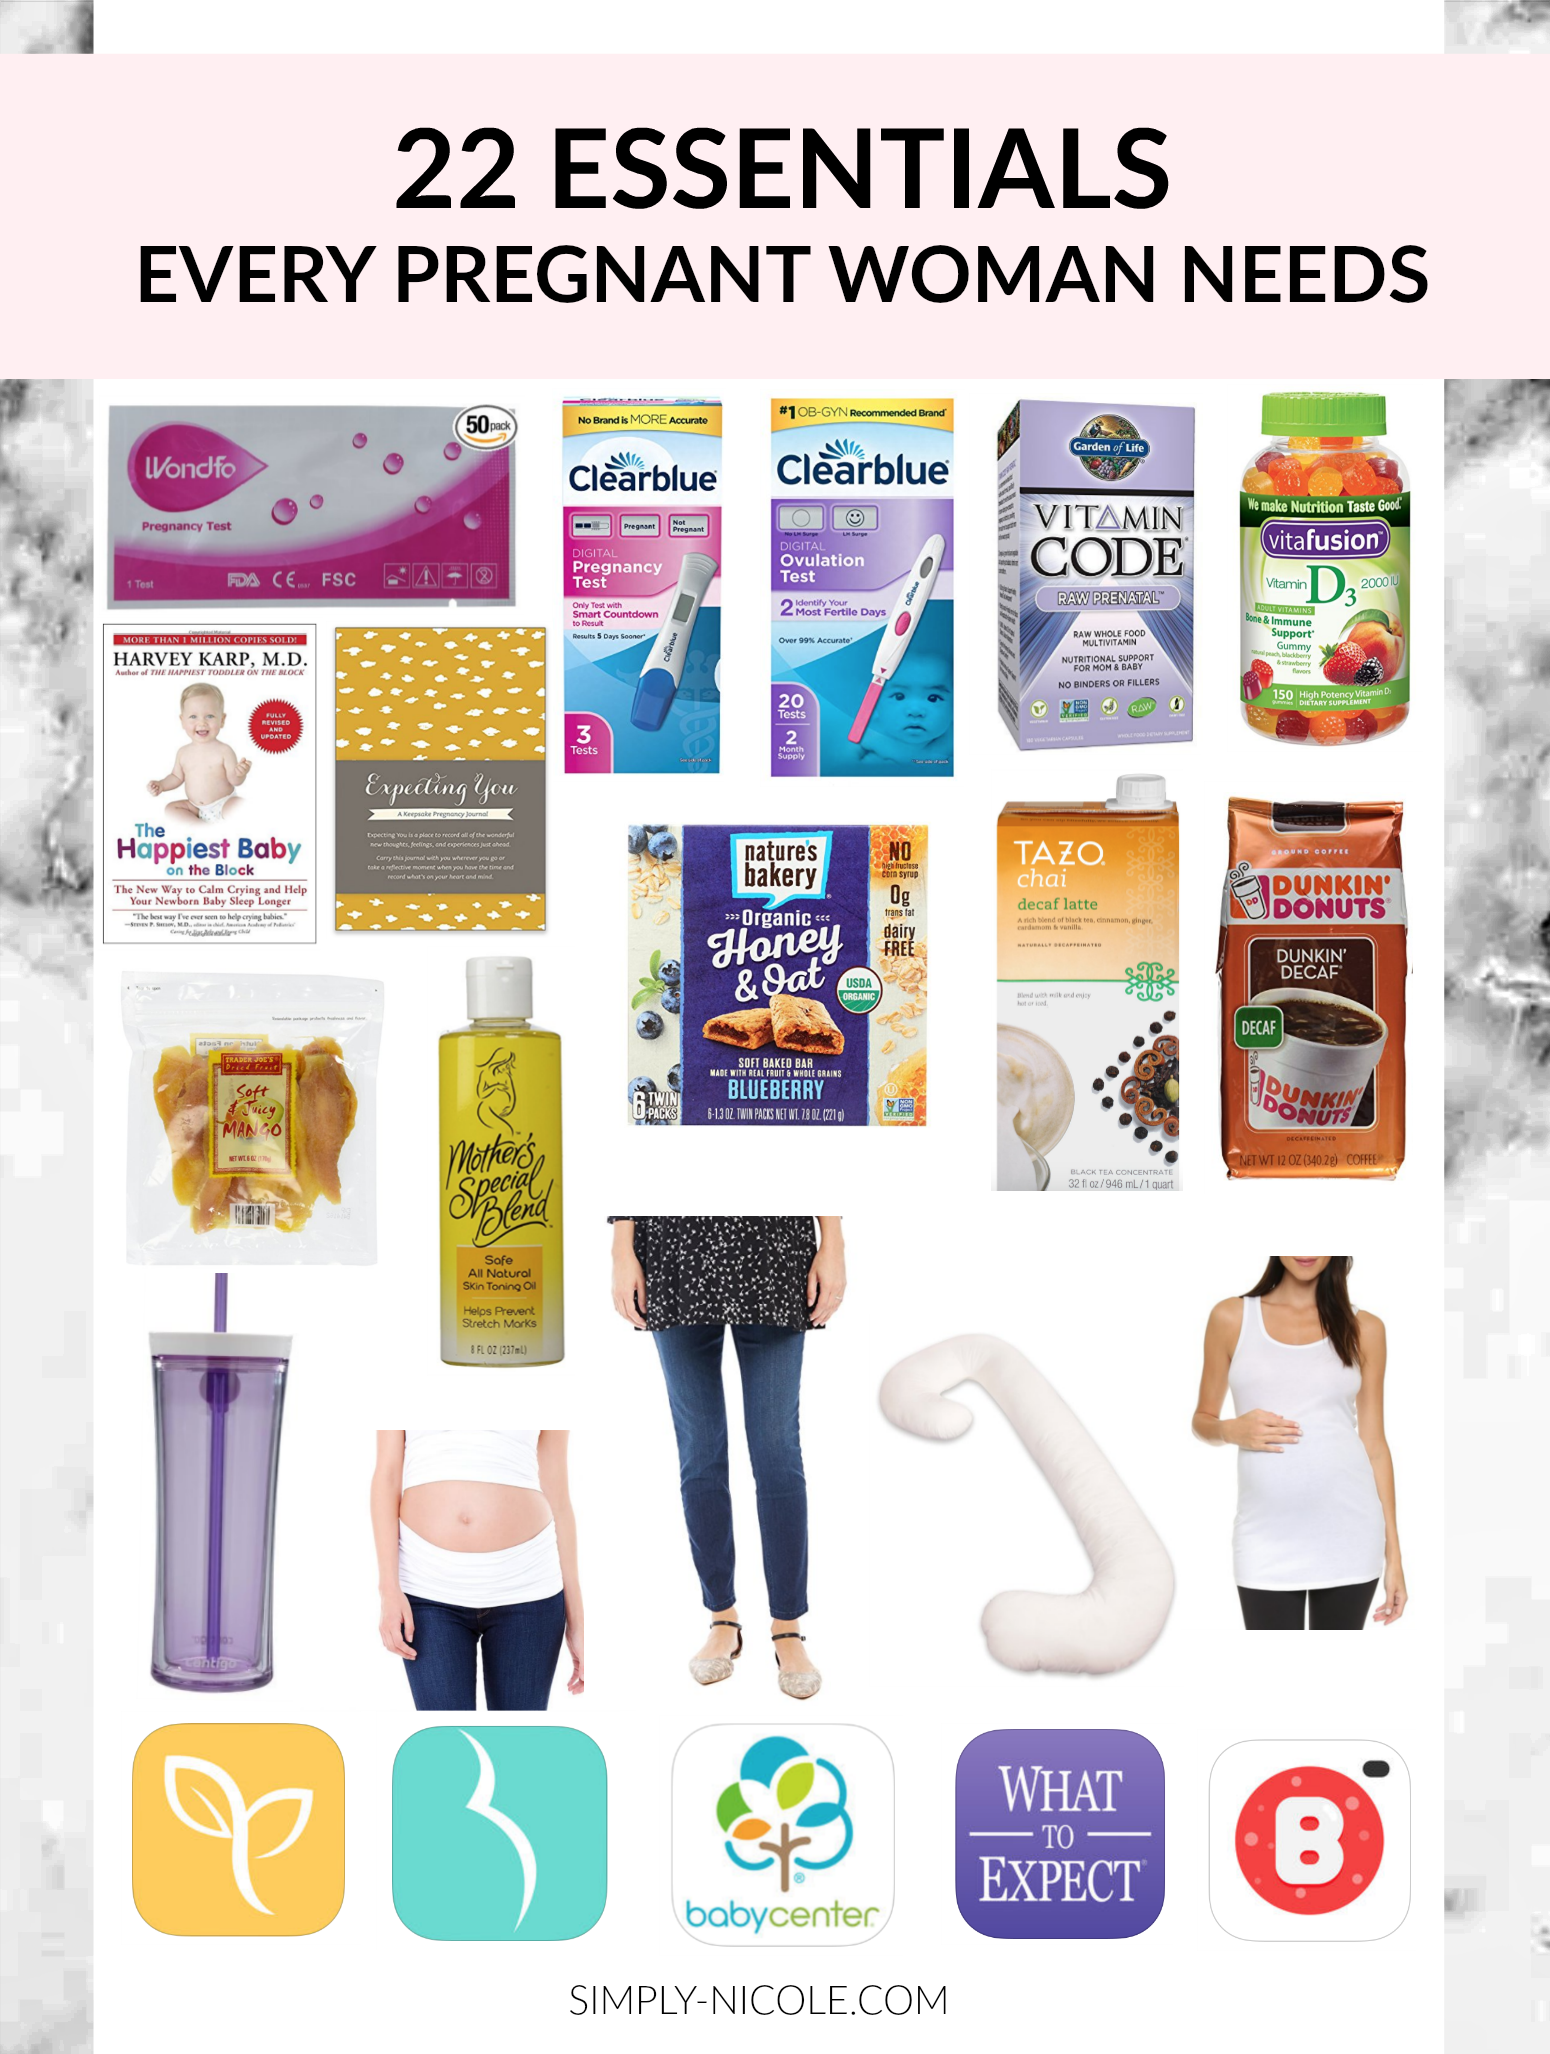 A Pregnant Woman Needs